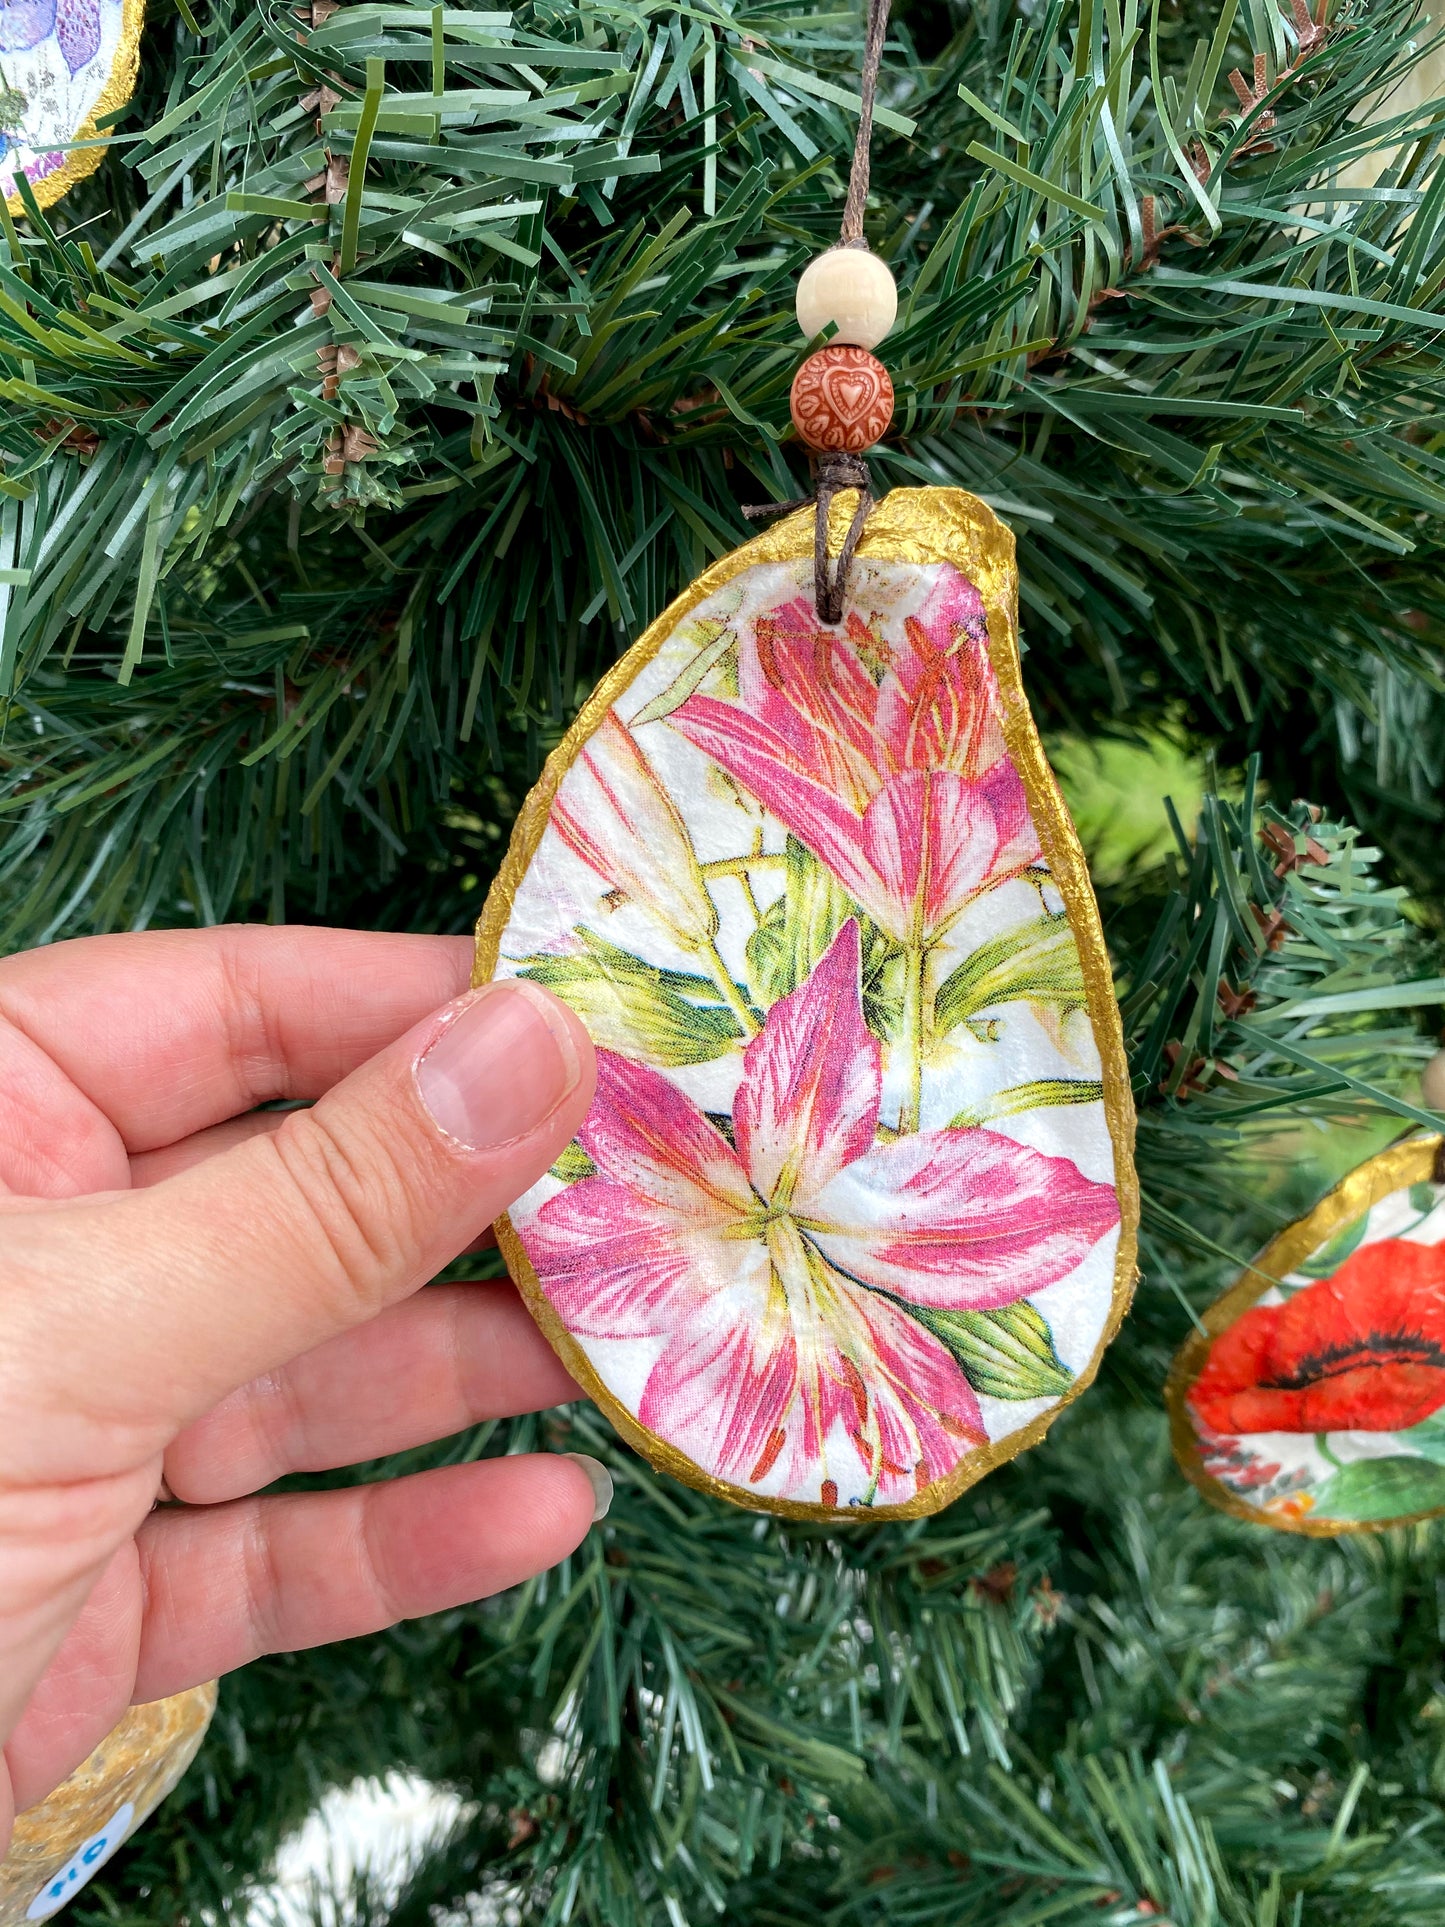 Oyster Shell Christmas Ornaments Custom Order Request, Made to order, Decoupage Seashell Christmas Ornament